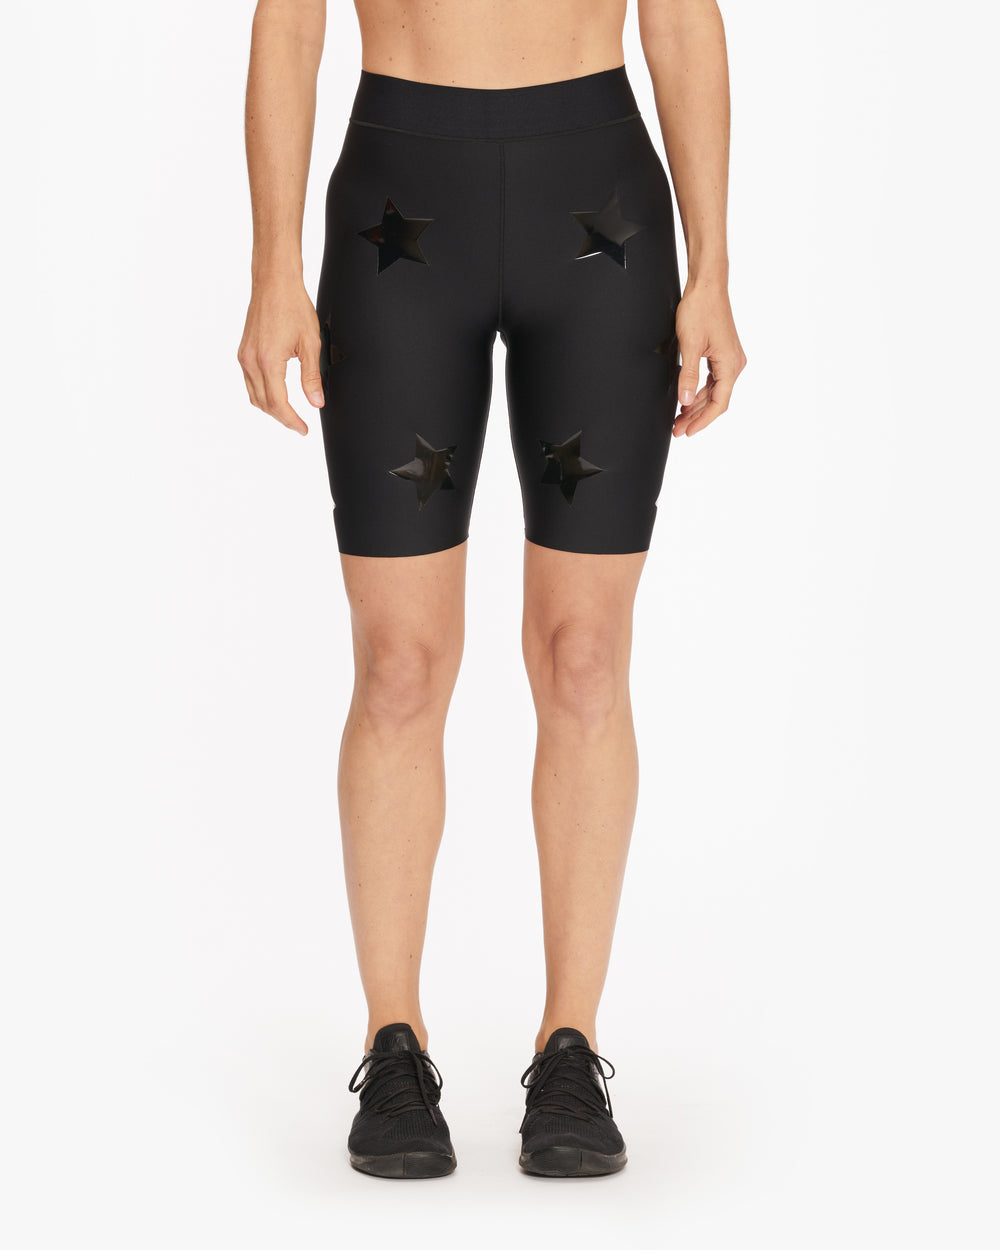 ULTRACOR AERO LUX KNOCKOUT SHORT